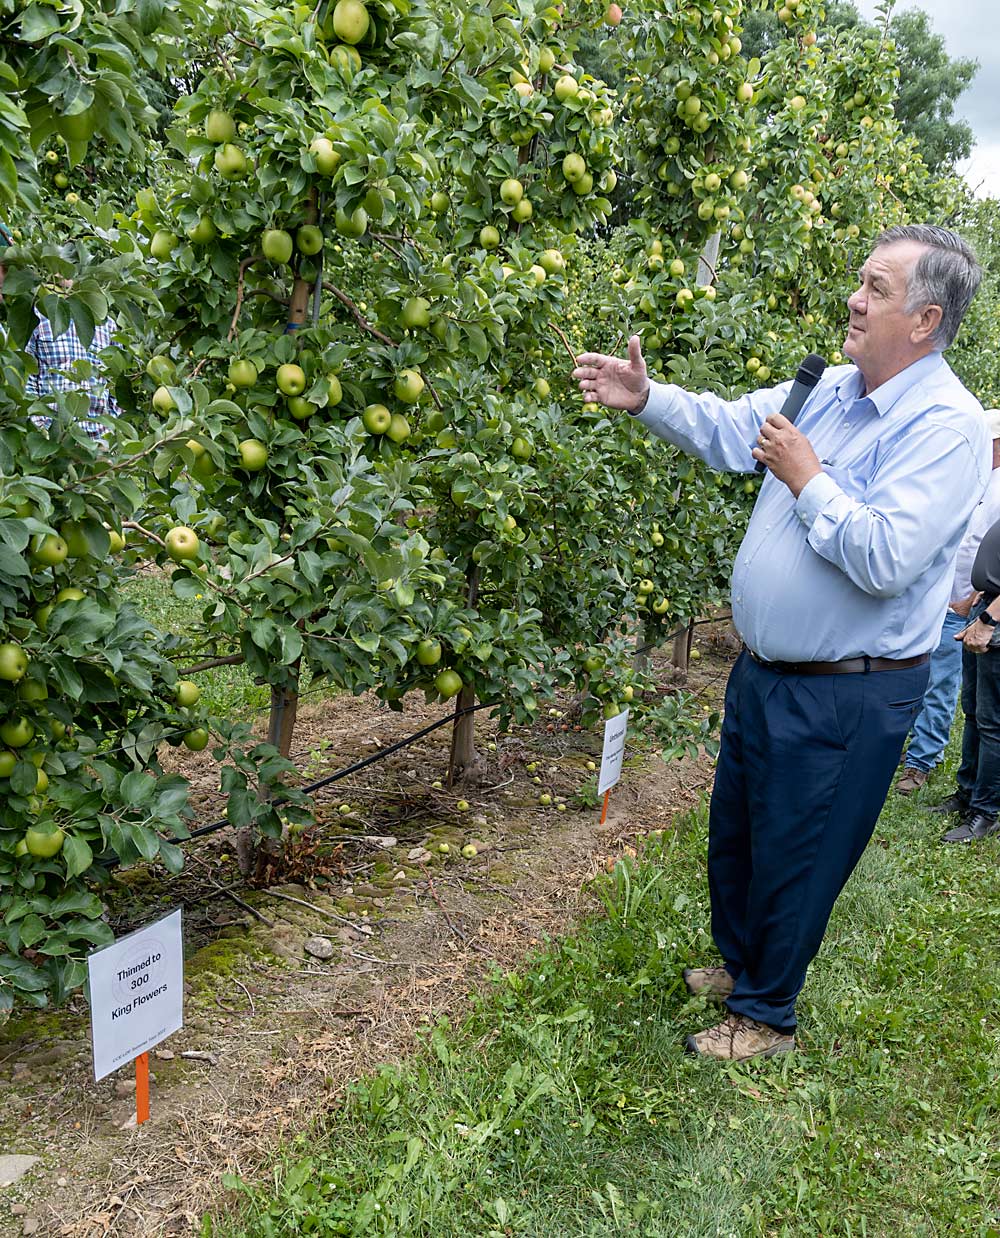 Cornell physiologist Terence Robinson discusses crop load management in a Honeycrisp block at Orchard Dale Fruit Co. in August in Orleans County, New York. Cornell researchers conducted precision pruning trials in the block, seeking to find the best ways to hit the target crop number. (Matt Milkovich/Good Fruit Grower)